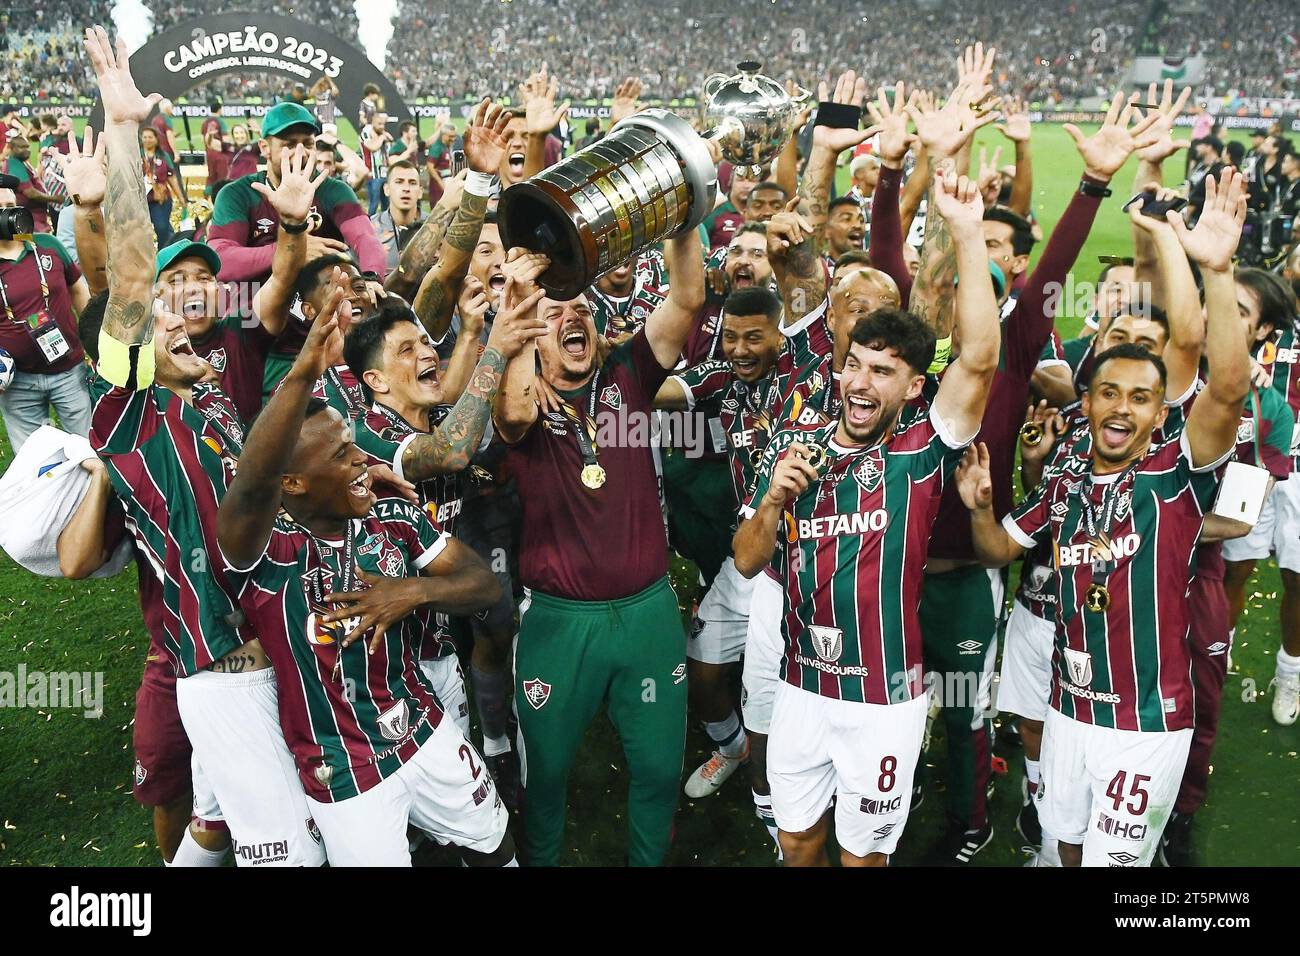 Rio de Janeiro, Brazil, November 4, 2023. Soccer players from the Fluminense team raise the trophy and celebrate winning the 2023 Copa Libertadores at Stock Photo